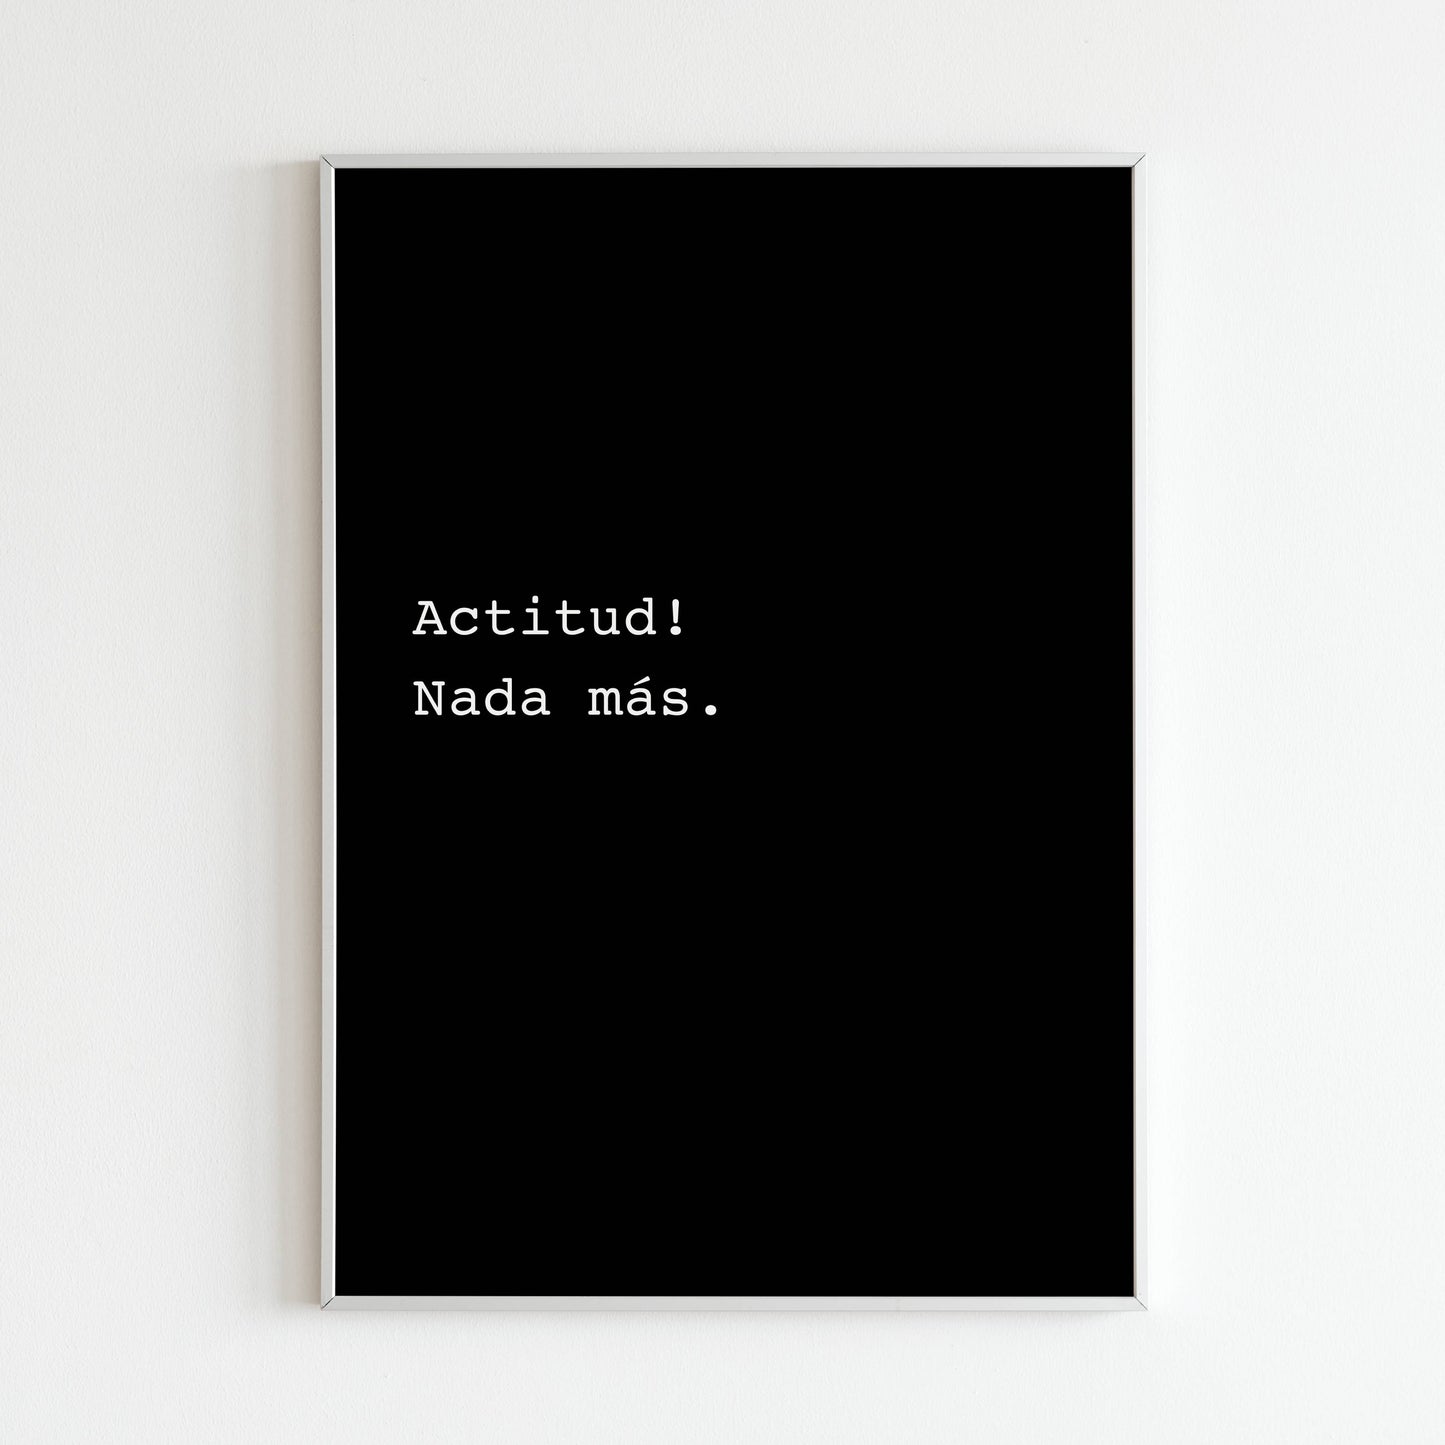 Downloadable "Actitud! Nada mas" wall art for a message of positive attitude (in Spanish).